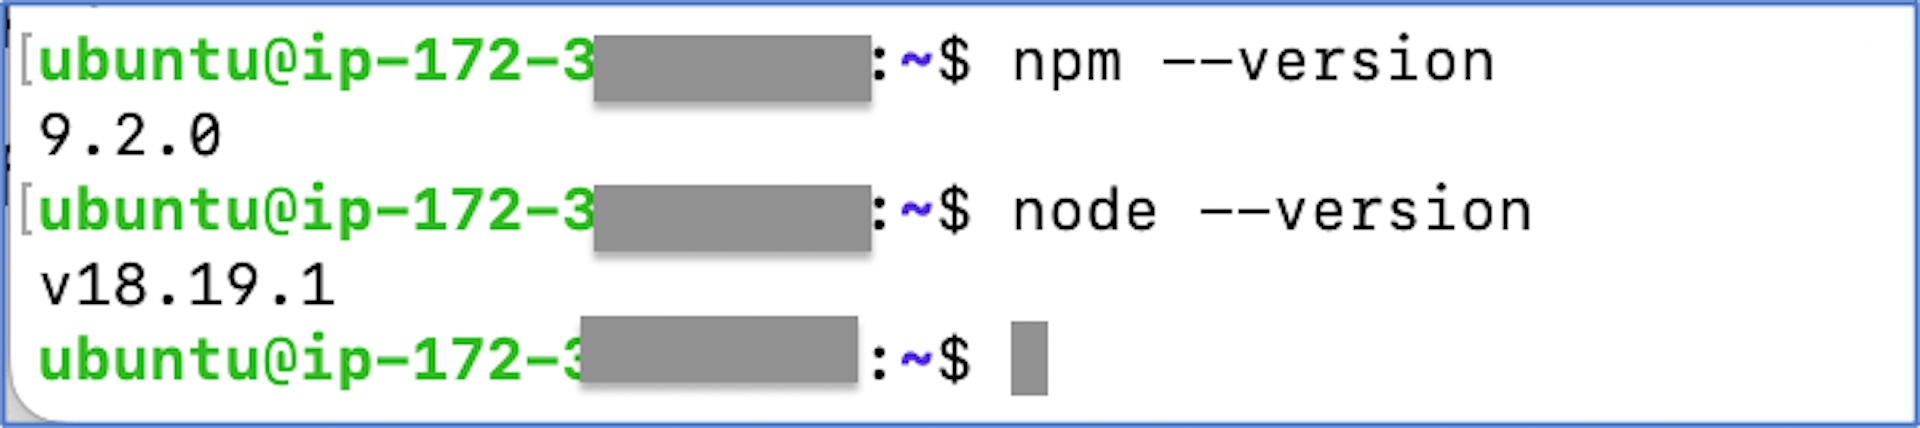 Check the node and npm versions after installed